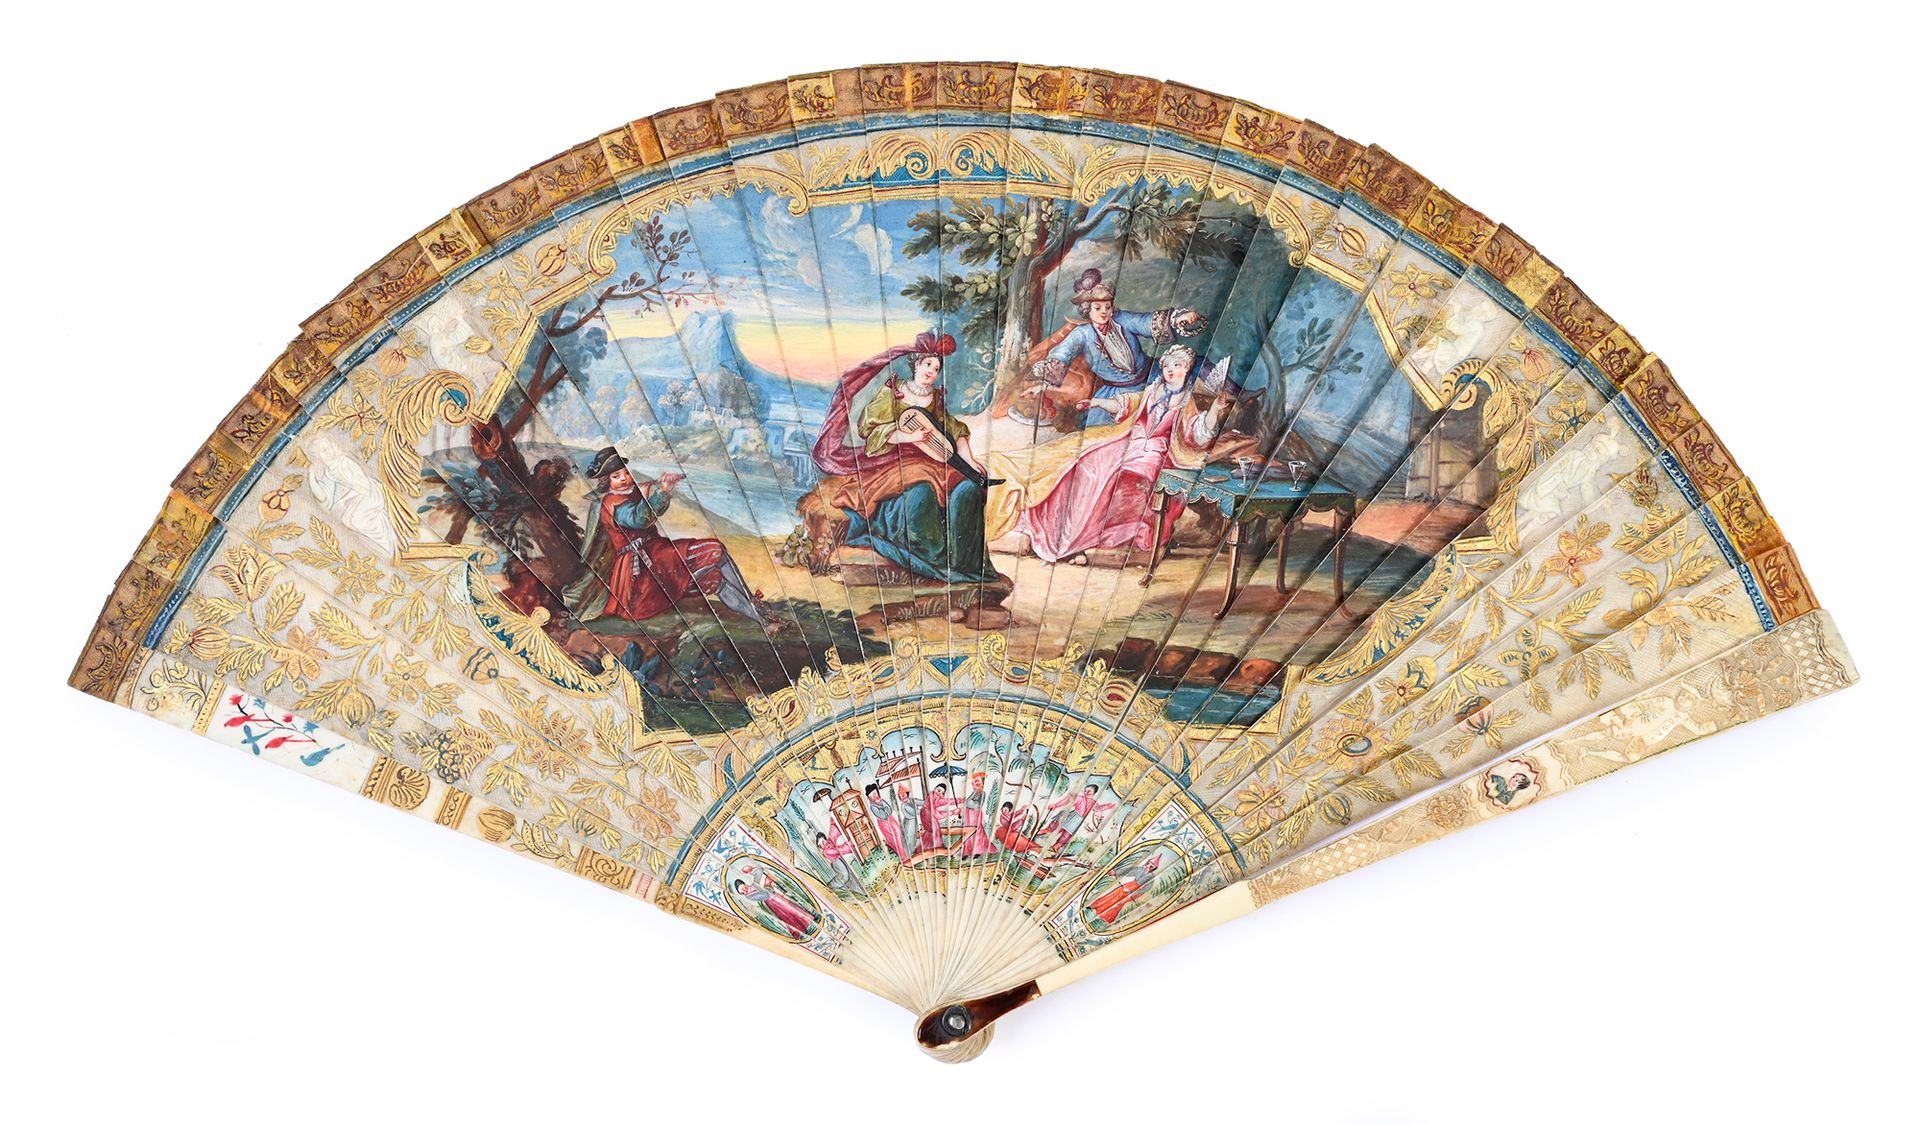 Null The Peach Lunch, circa 1700-1720
Finely painted ivory fan of a country lunc&hellip;